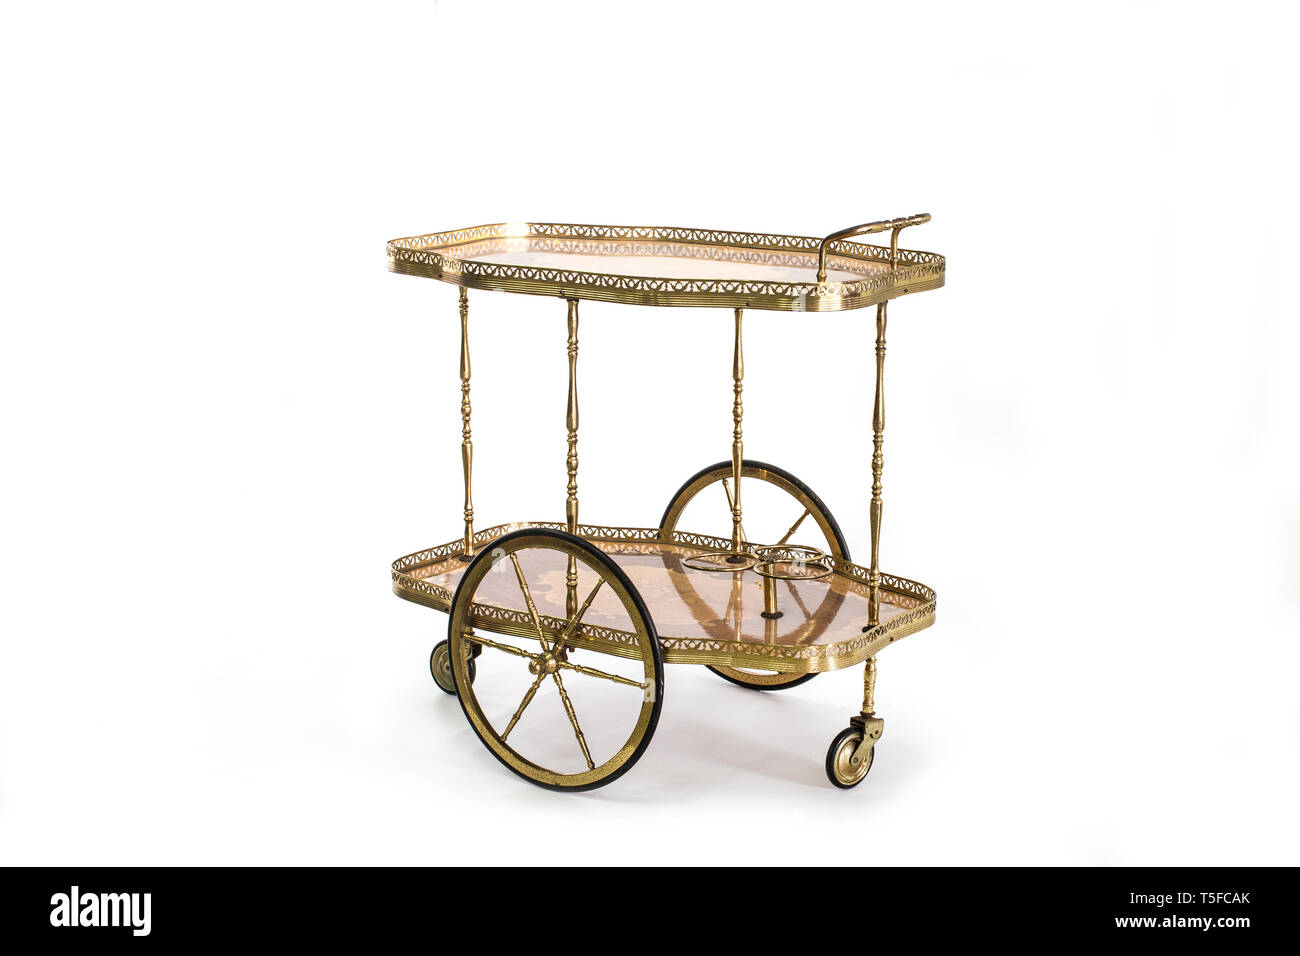 Antique serving table on wheels, decorated with galleries Stock Photo